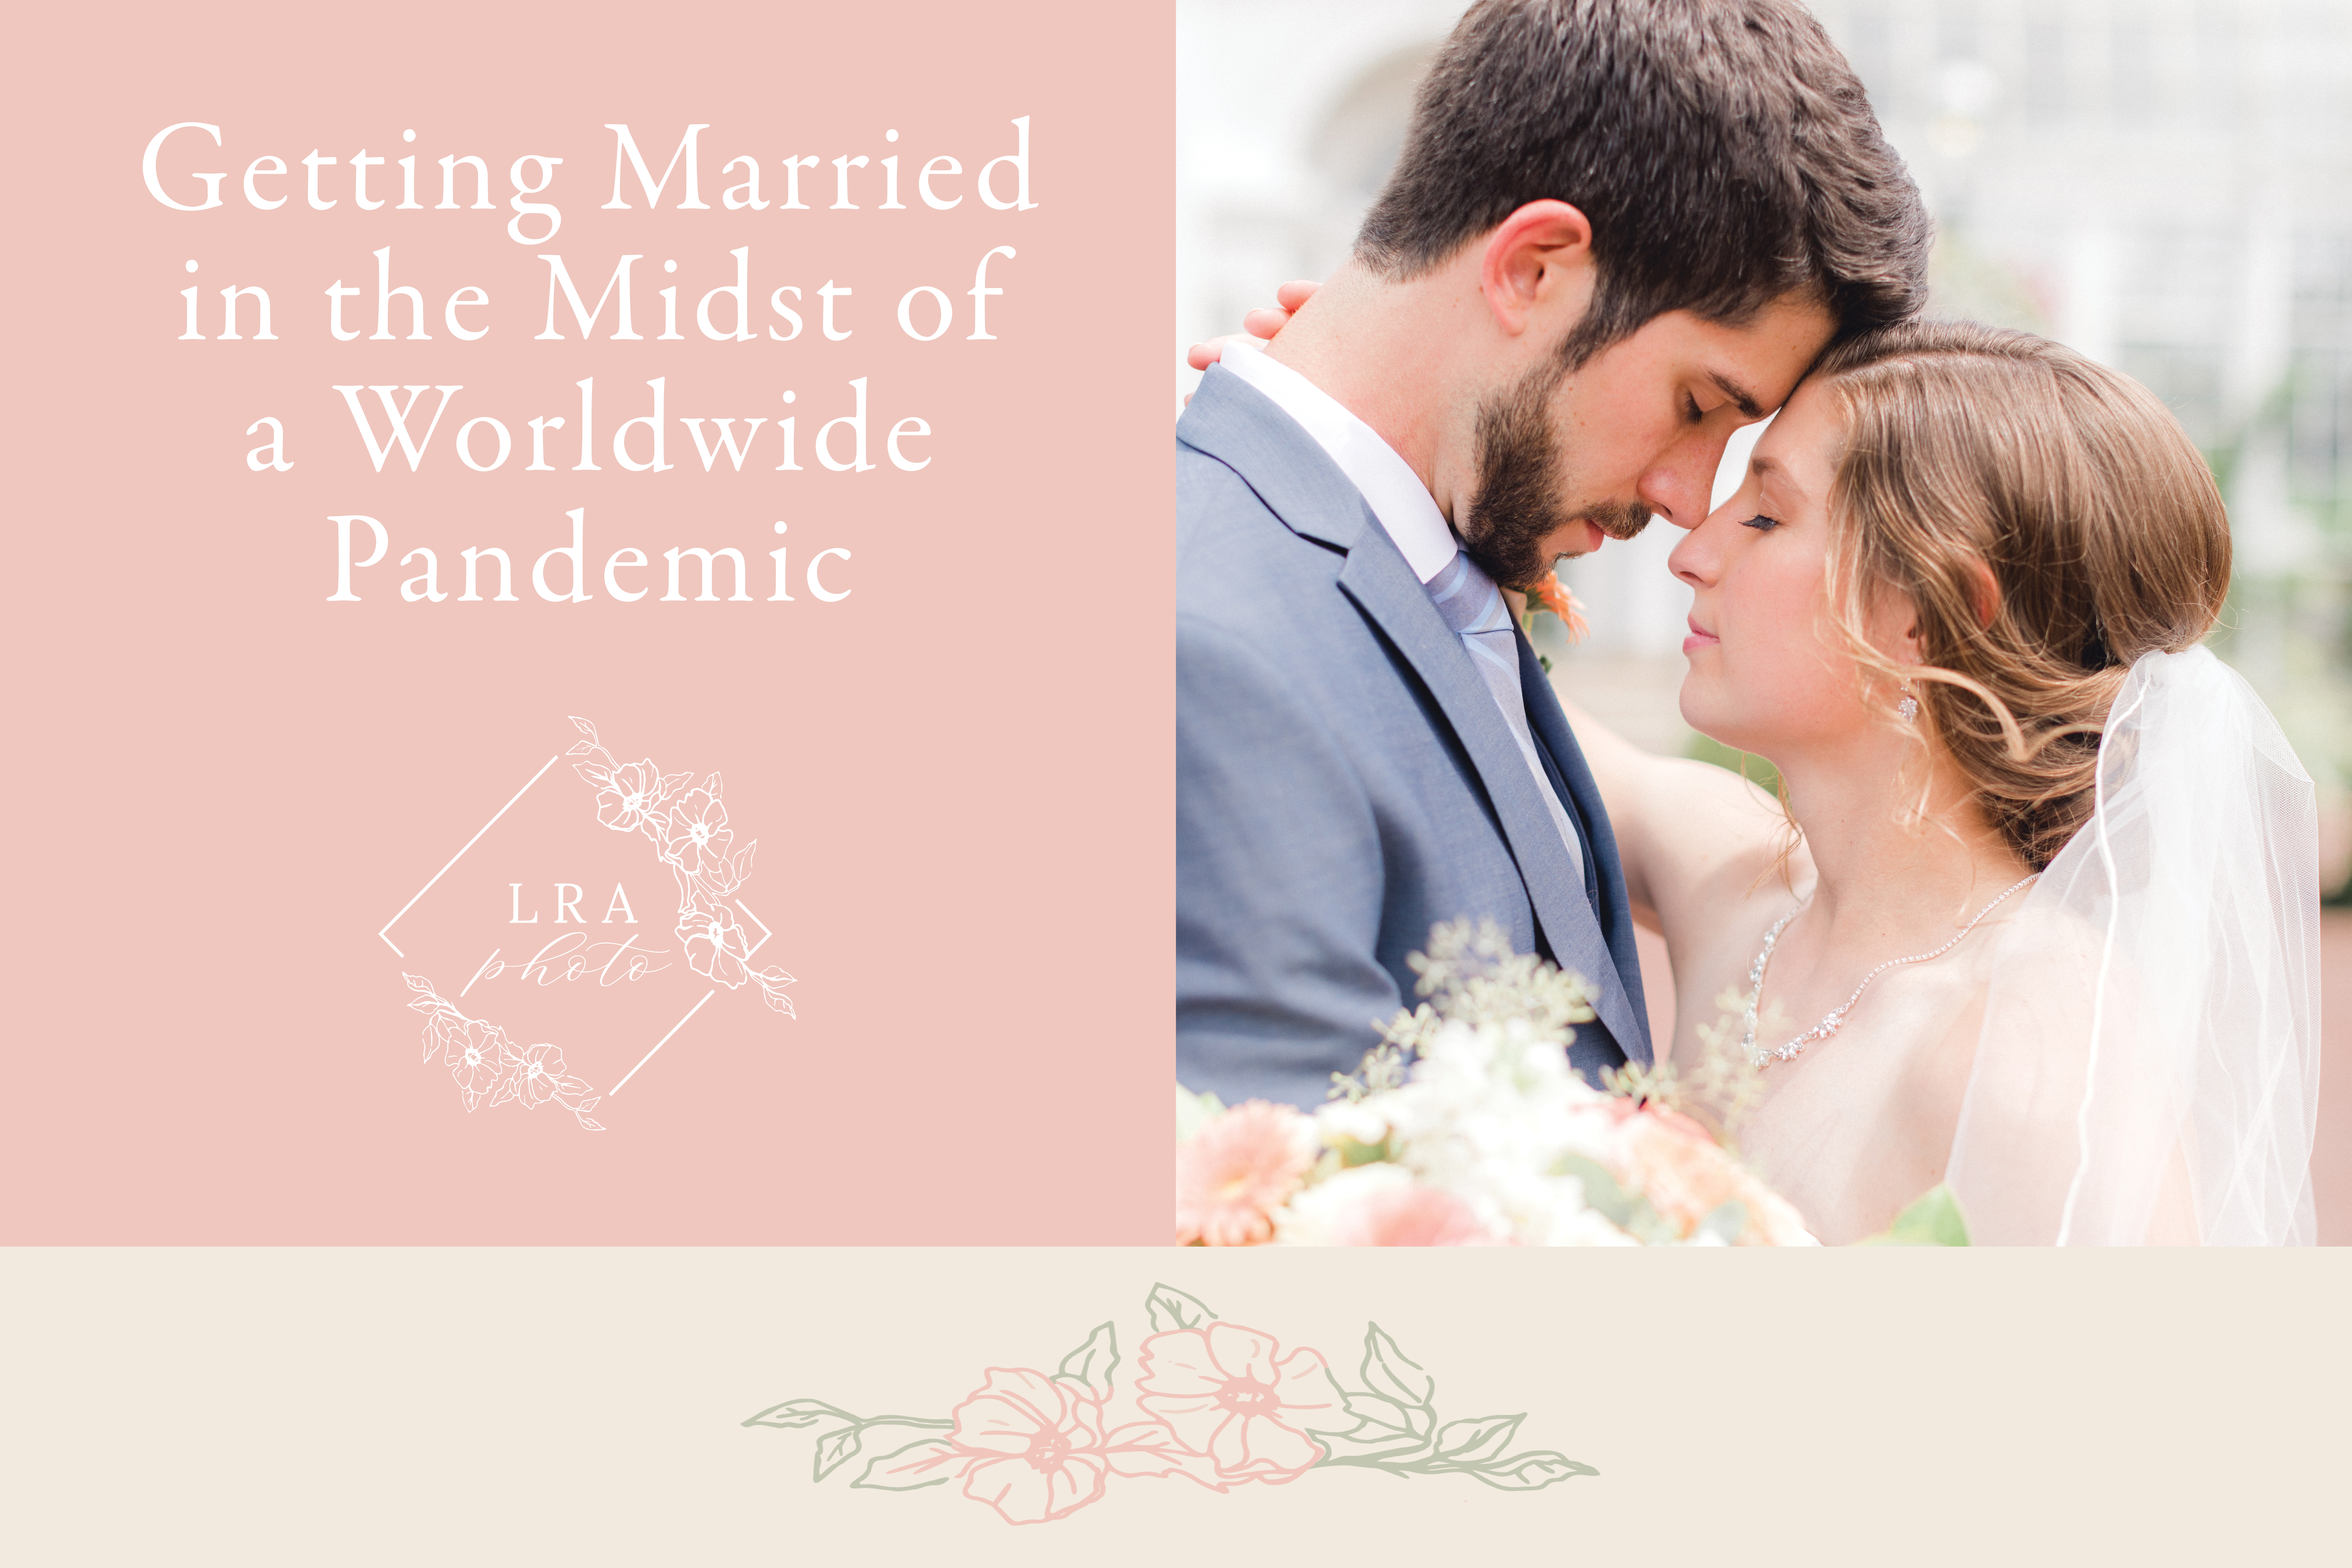 Getting Married in a Pandemic